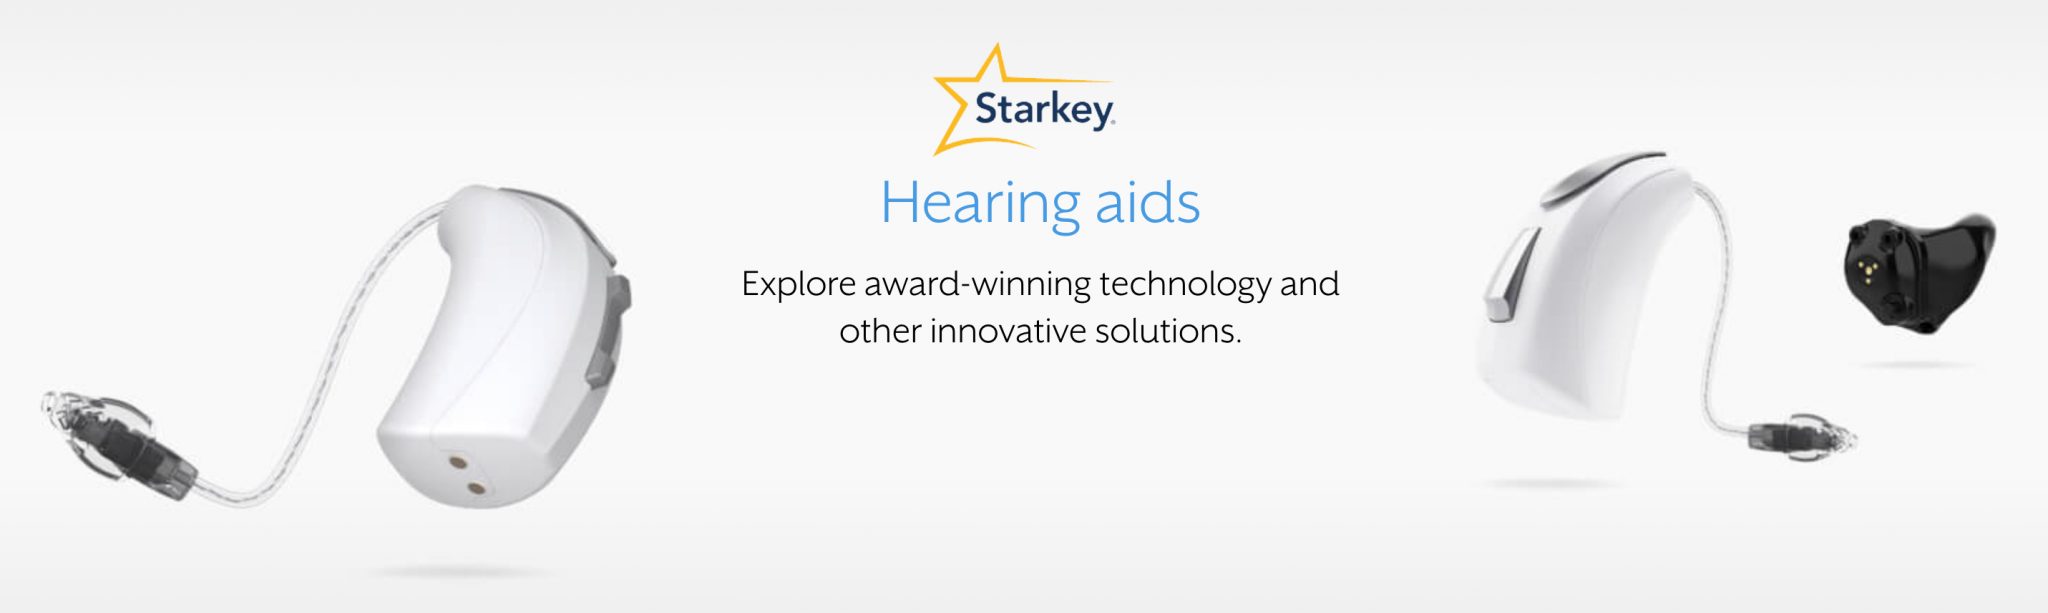 Starkey Hearing Aids in Stoke-on-Trent, Newcastle-under-Lyme and Cheshire